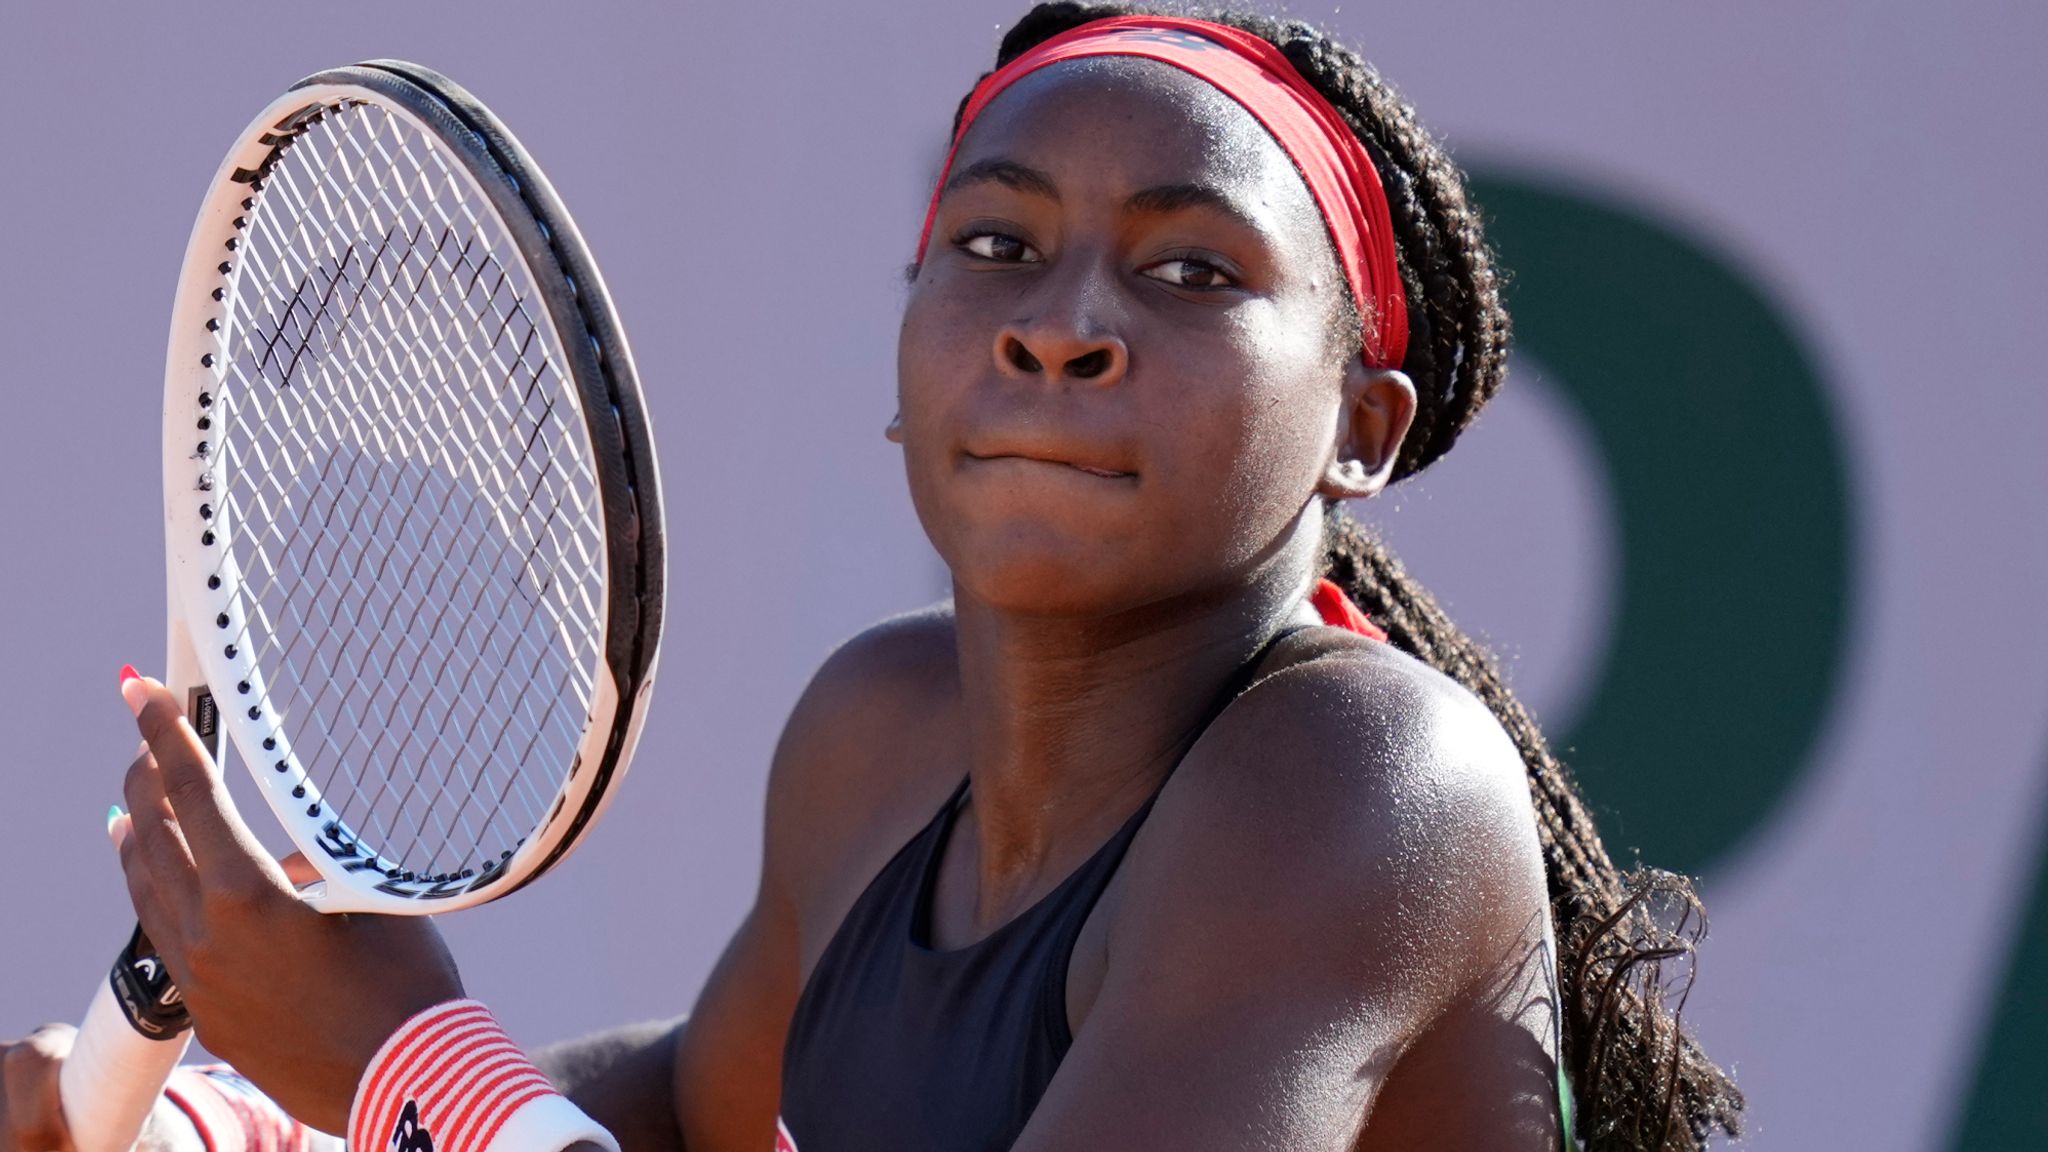 Wimbledon Coco Gauff says she is excited about returning this summer Tennis News Sky Sports